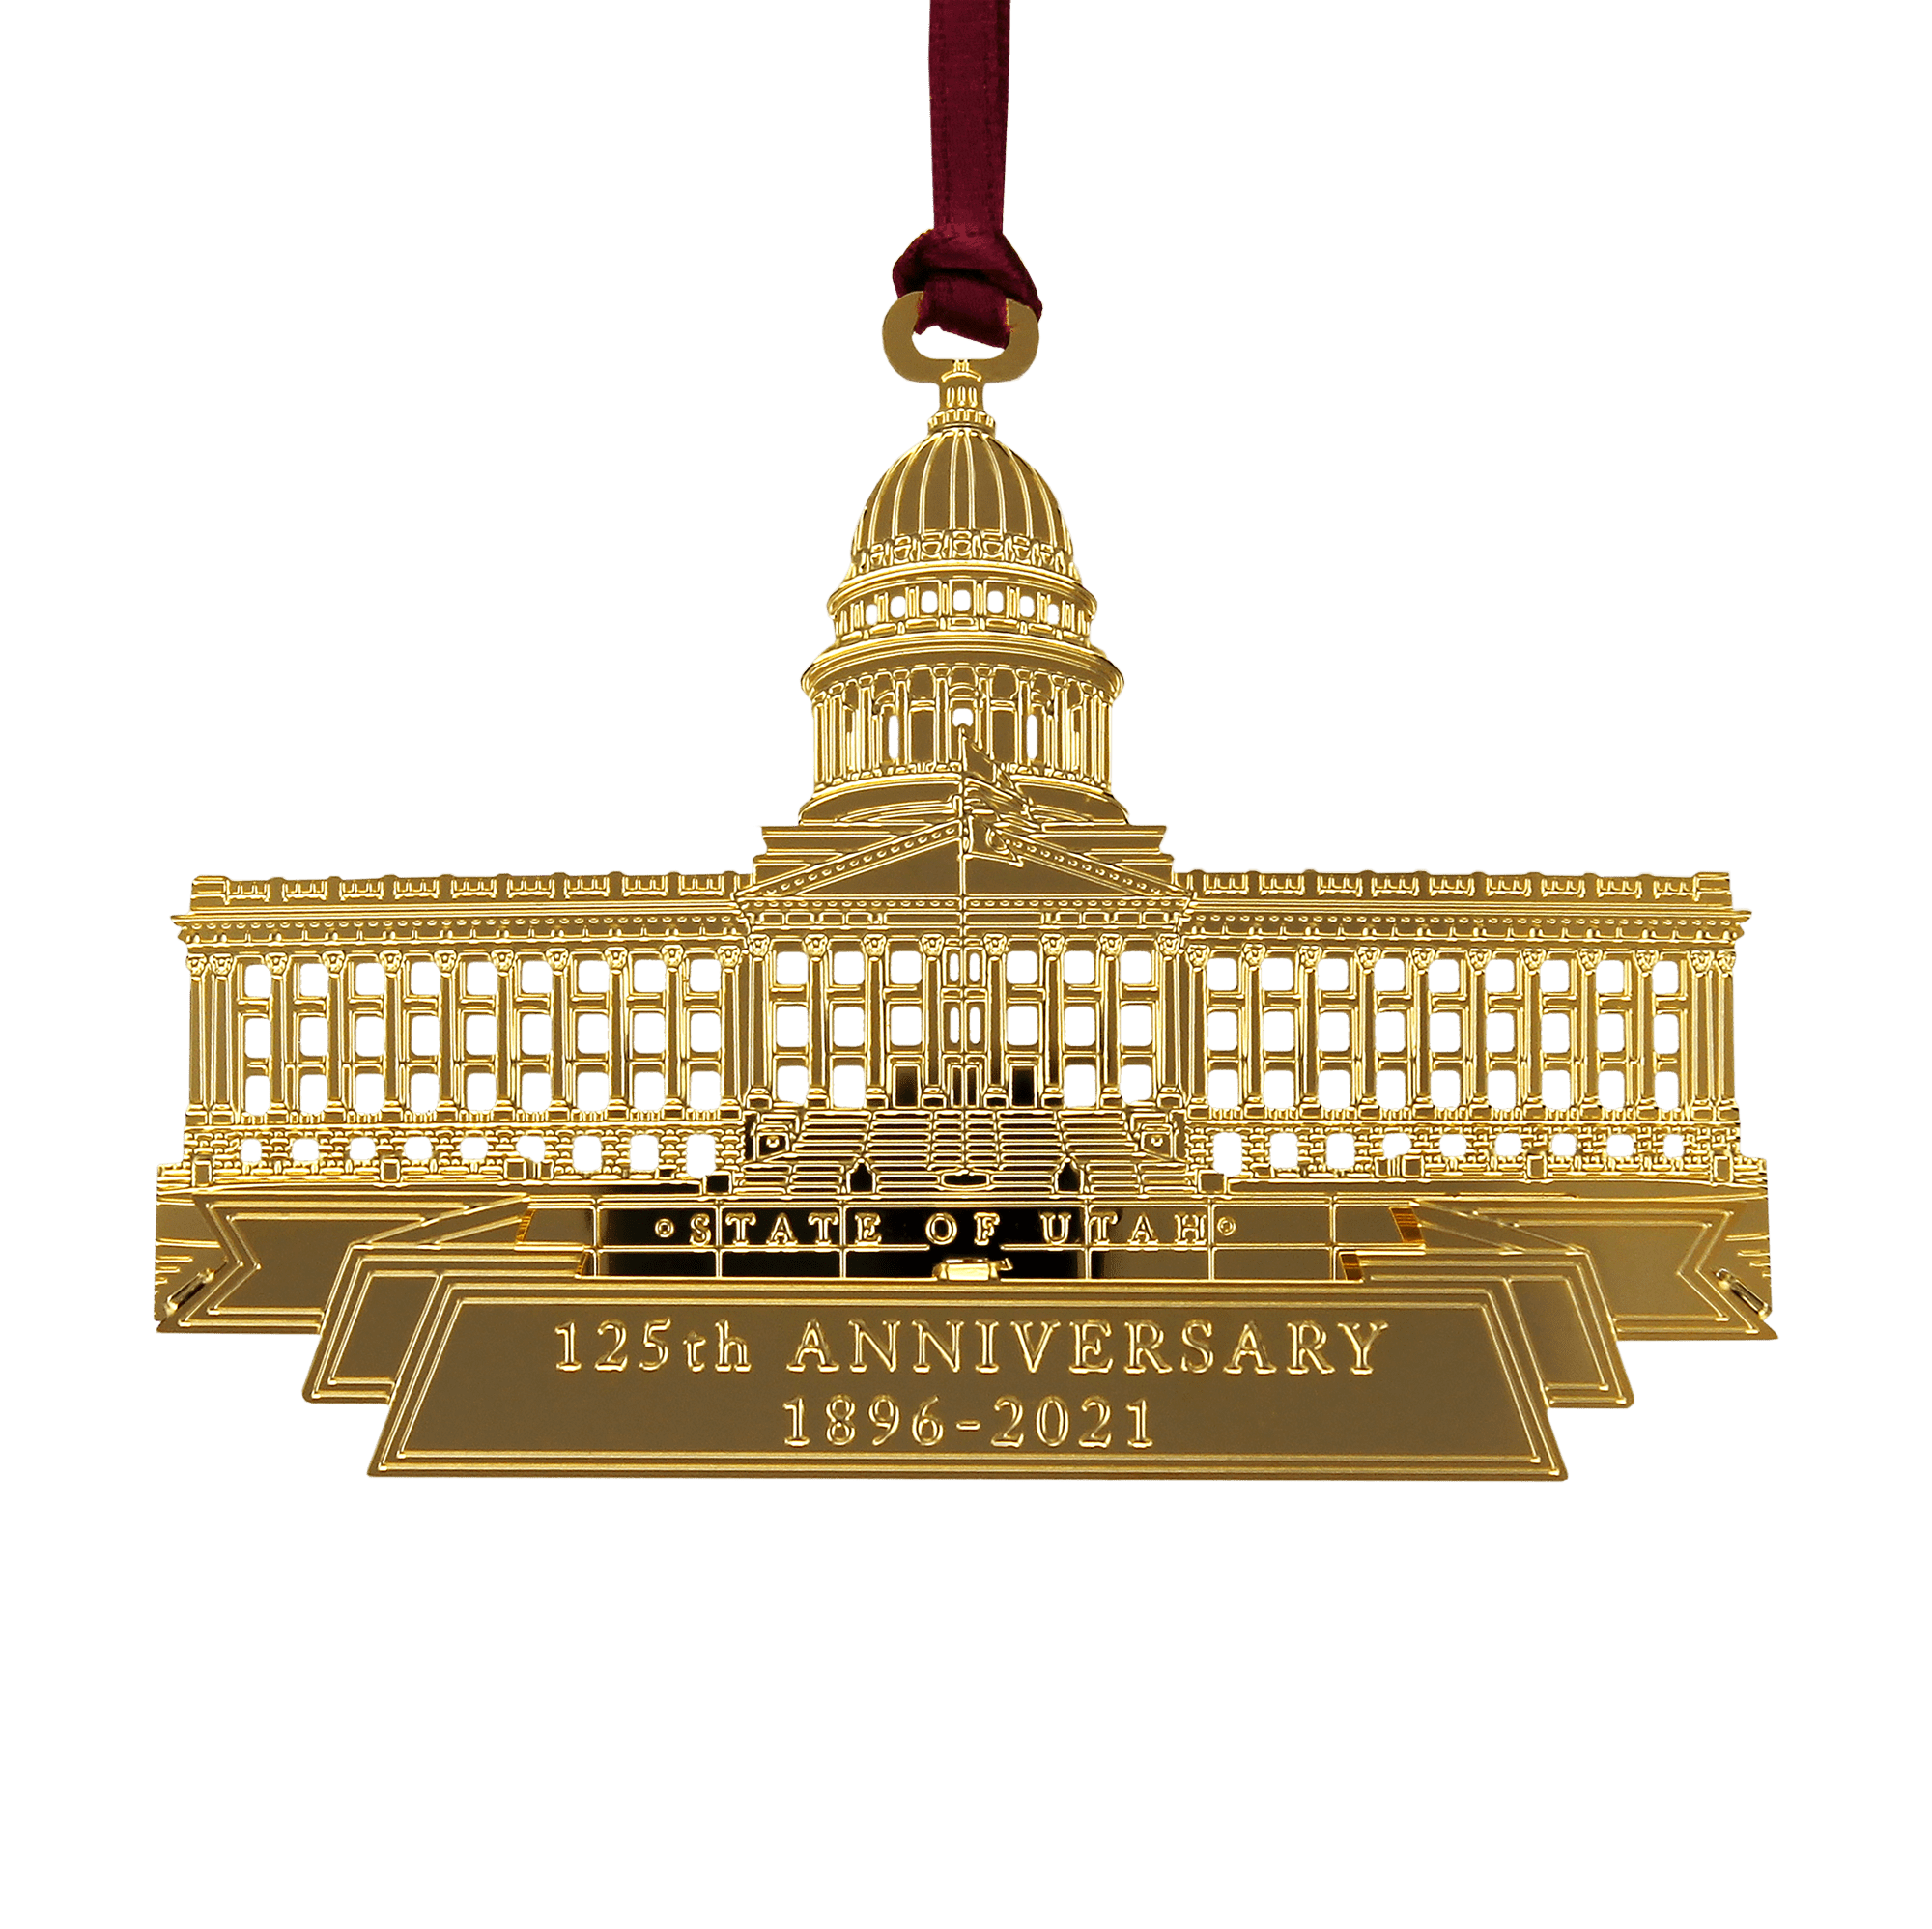 2-D Brass ornament finished in 24K gold